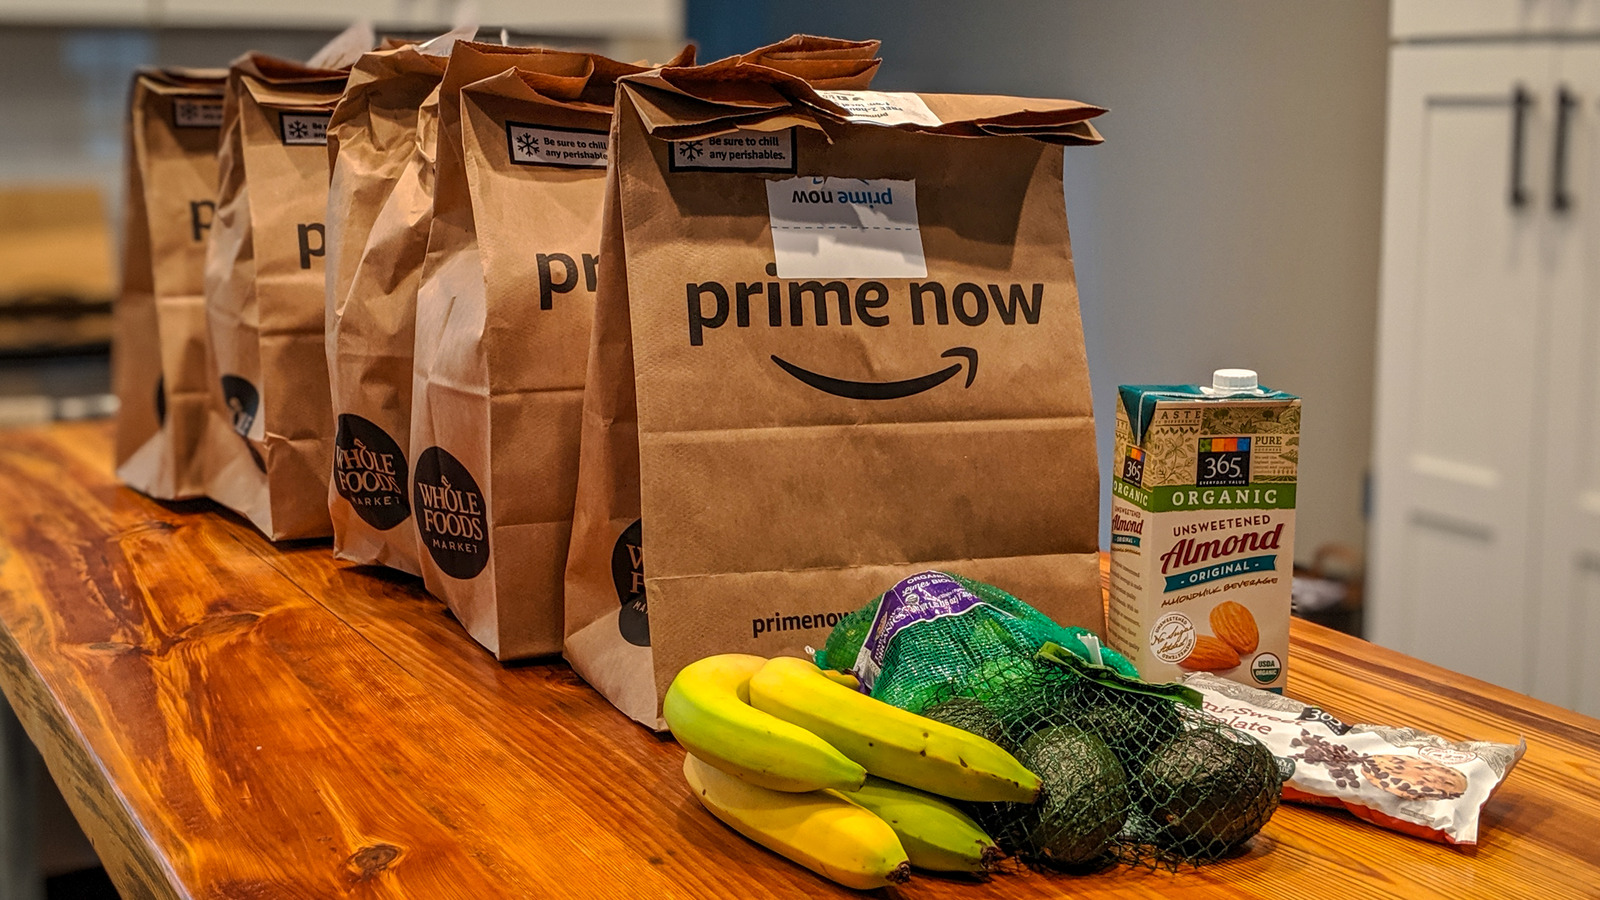 https://www.tastingtable.com/img/gallery/amazon-will-soon-charge-prime-members-for-some-grocery-deliveries/l-intro-1675111201.jpg